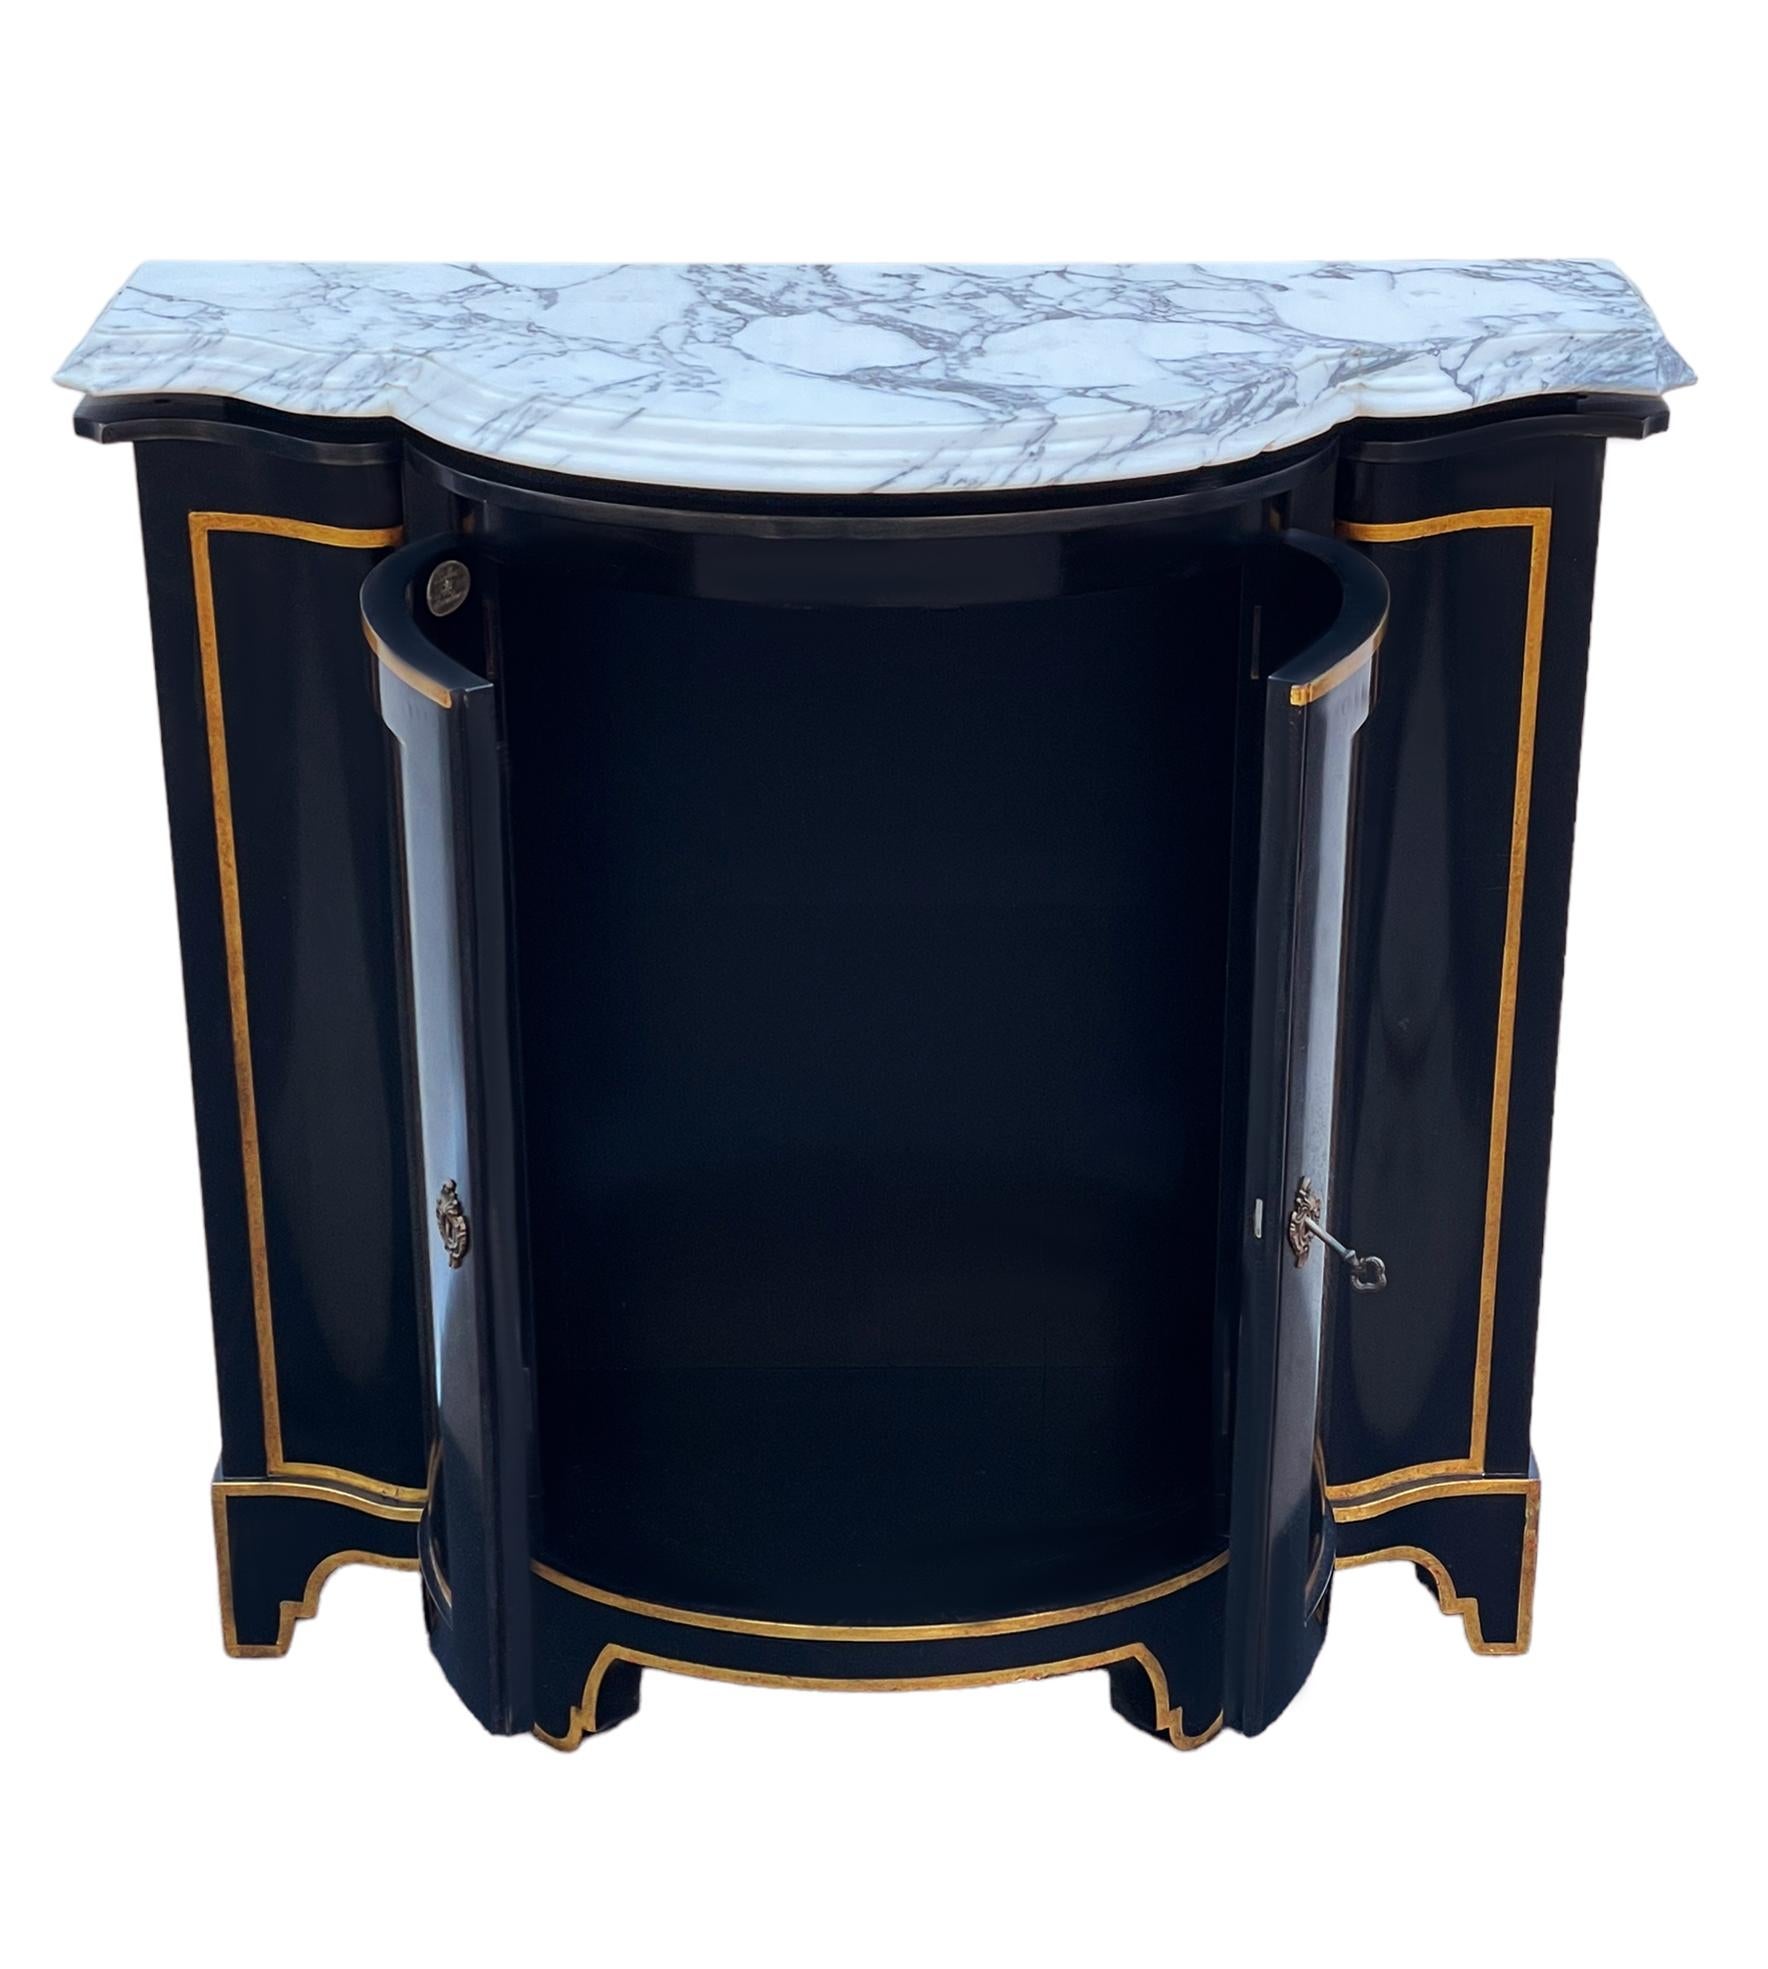 Hollywood Regency Black, Gold & Marble Storage Cabinet or Credenza by Baker In Good Condition For Sale In Philadelphia, PA